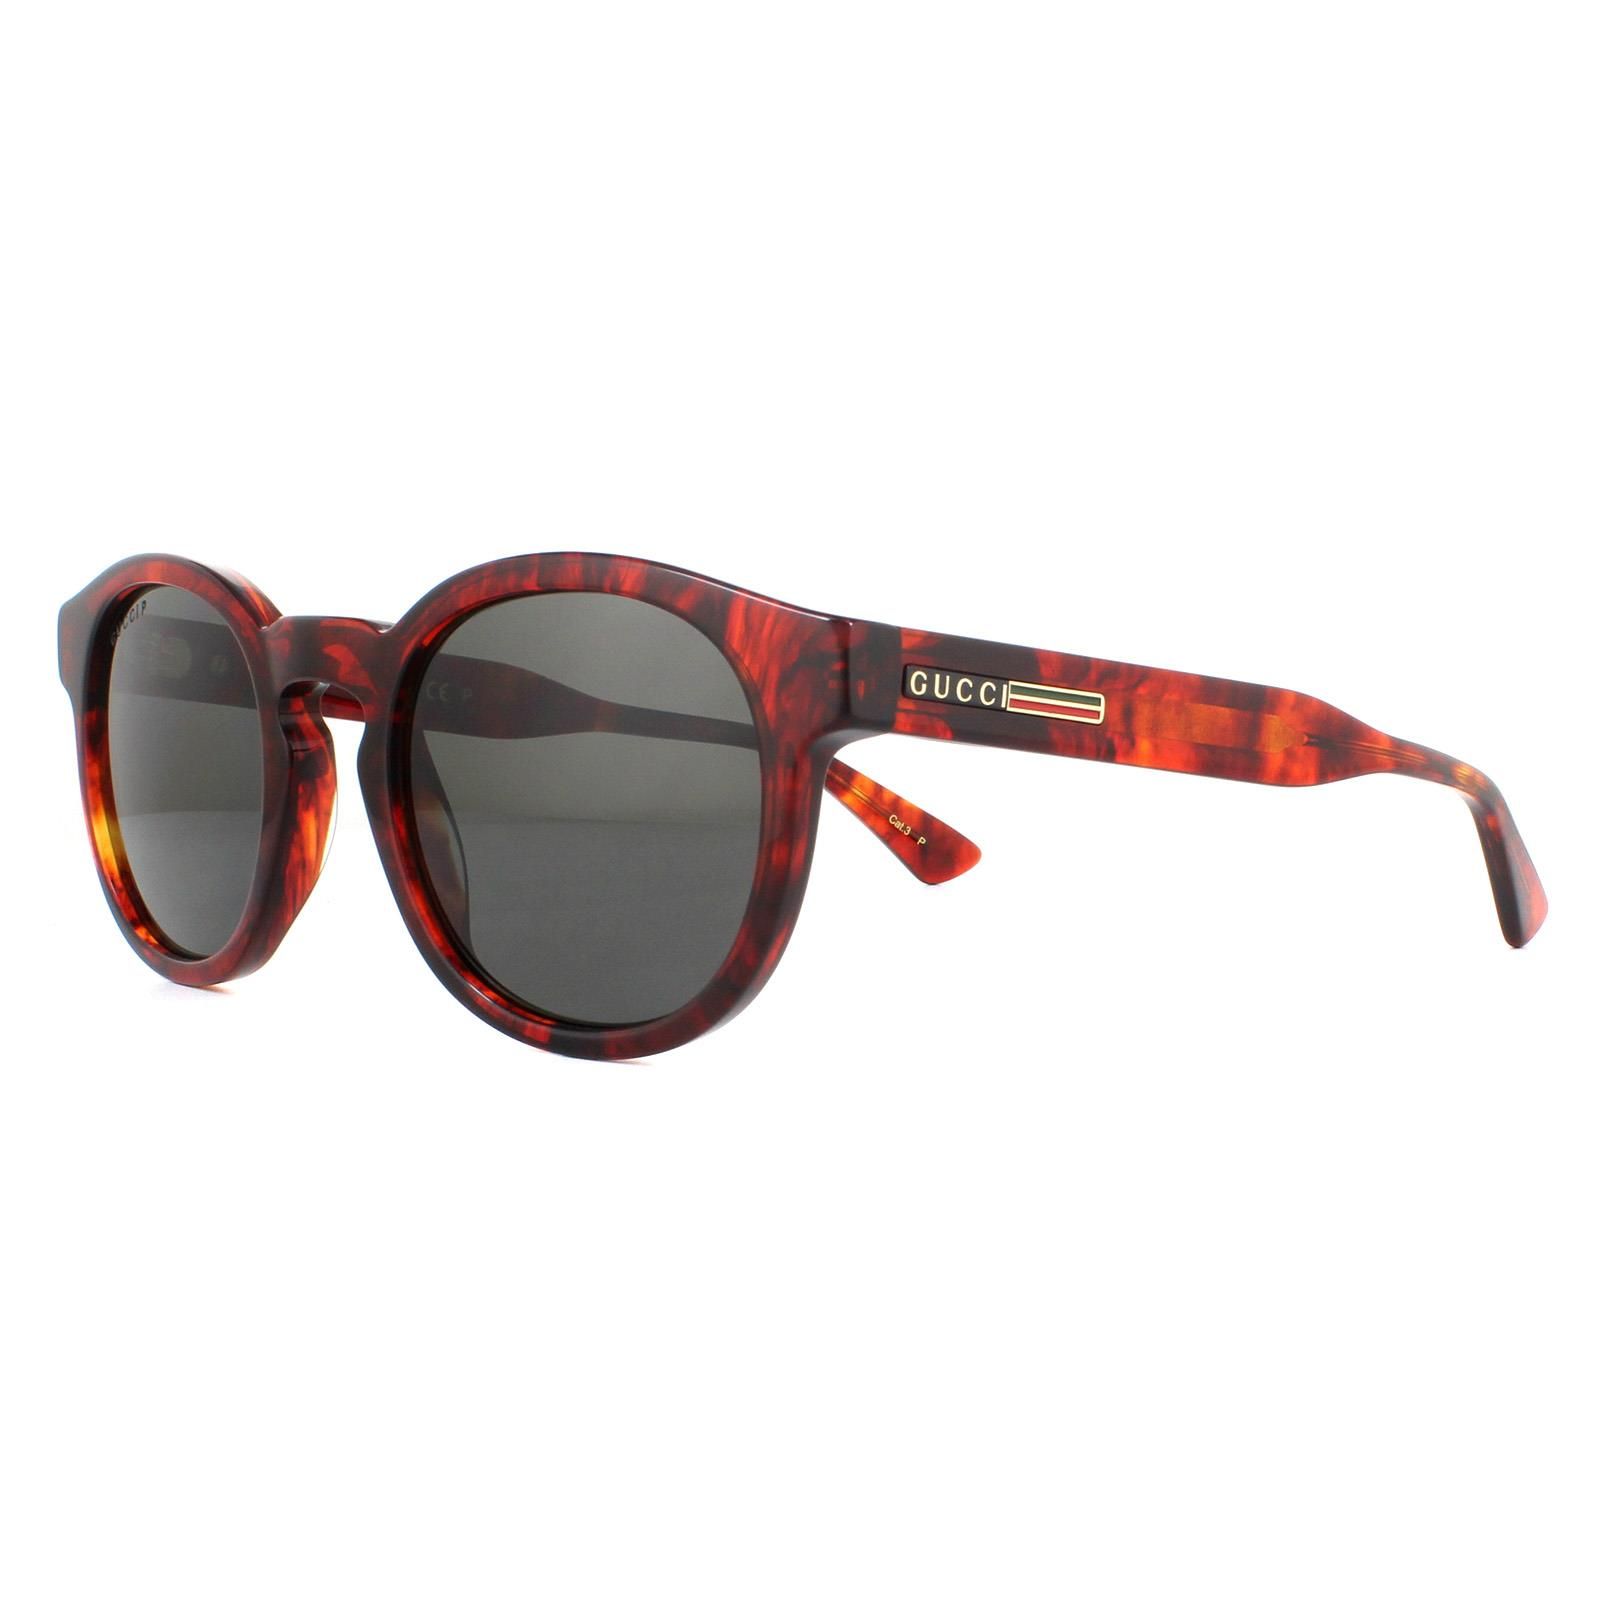 Gucci Sunglasses GG0825S 005 Havana Grey Polarized are a simple round style crafted from lightweight acetate. They feature a keyhole bridge and thin temple tips for a comfortable fit. To finish the look the Gucci brand features on the  temples for authenticity.